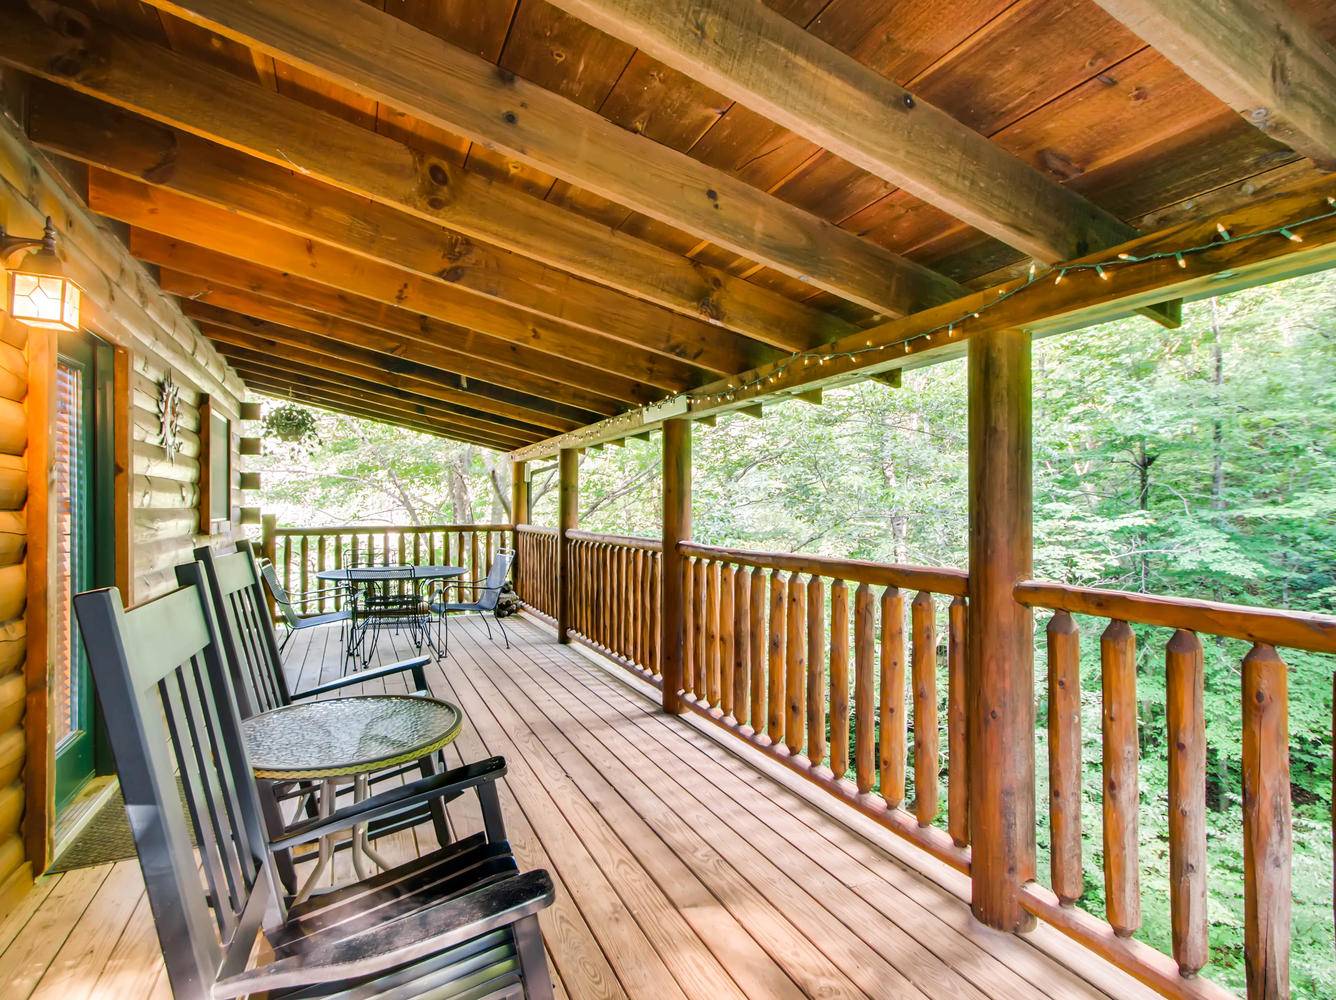 Wild At Heart | RE/MAX Cove Mountain Realty & Cabins